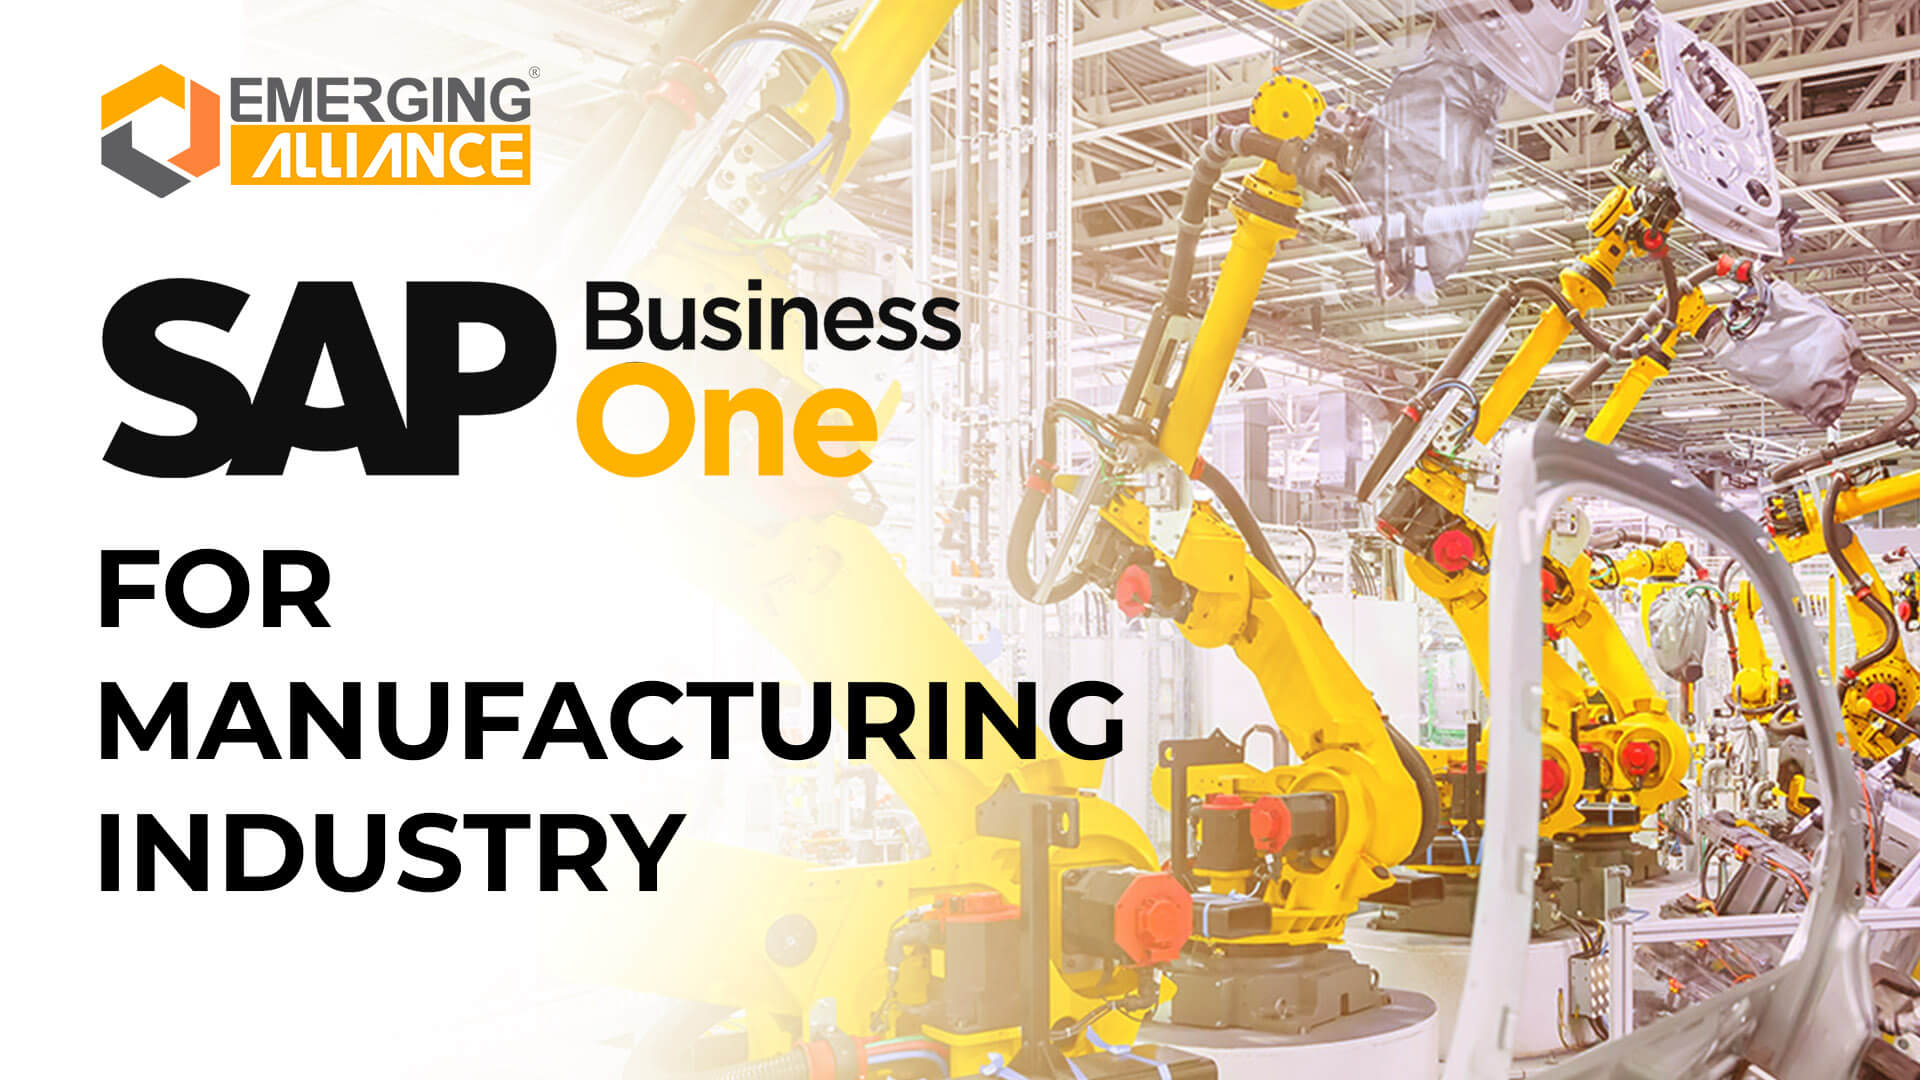 sap business one for Manufacturing industry